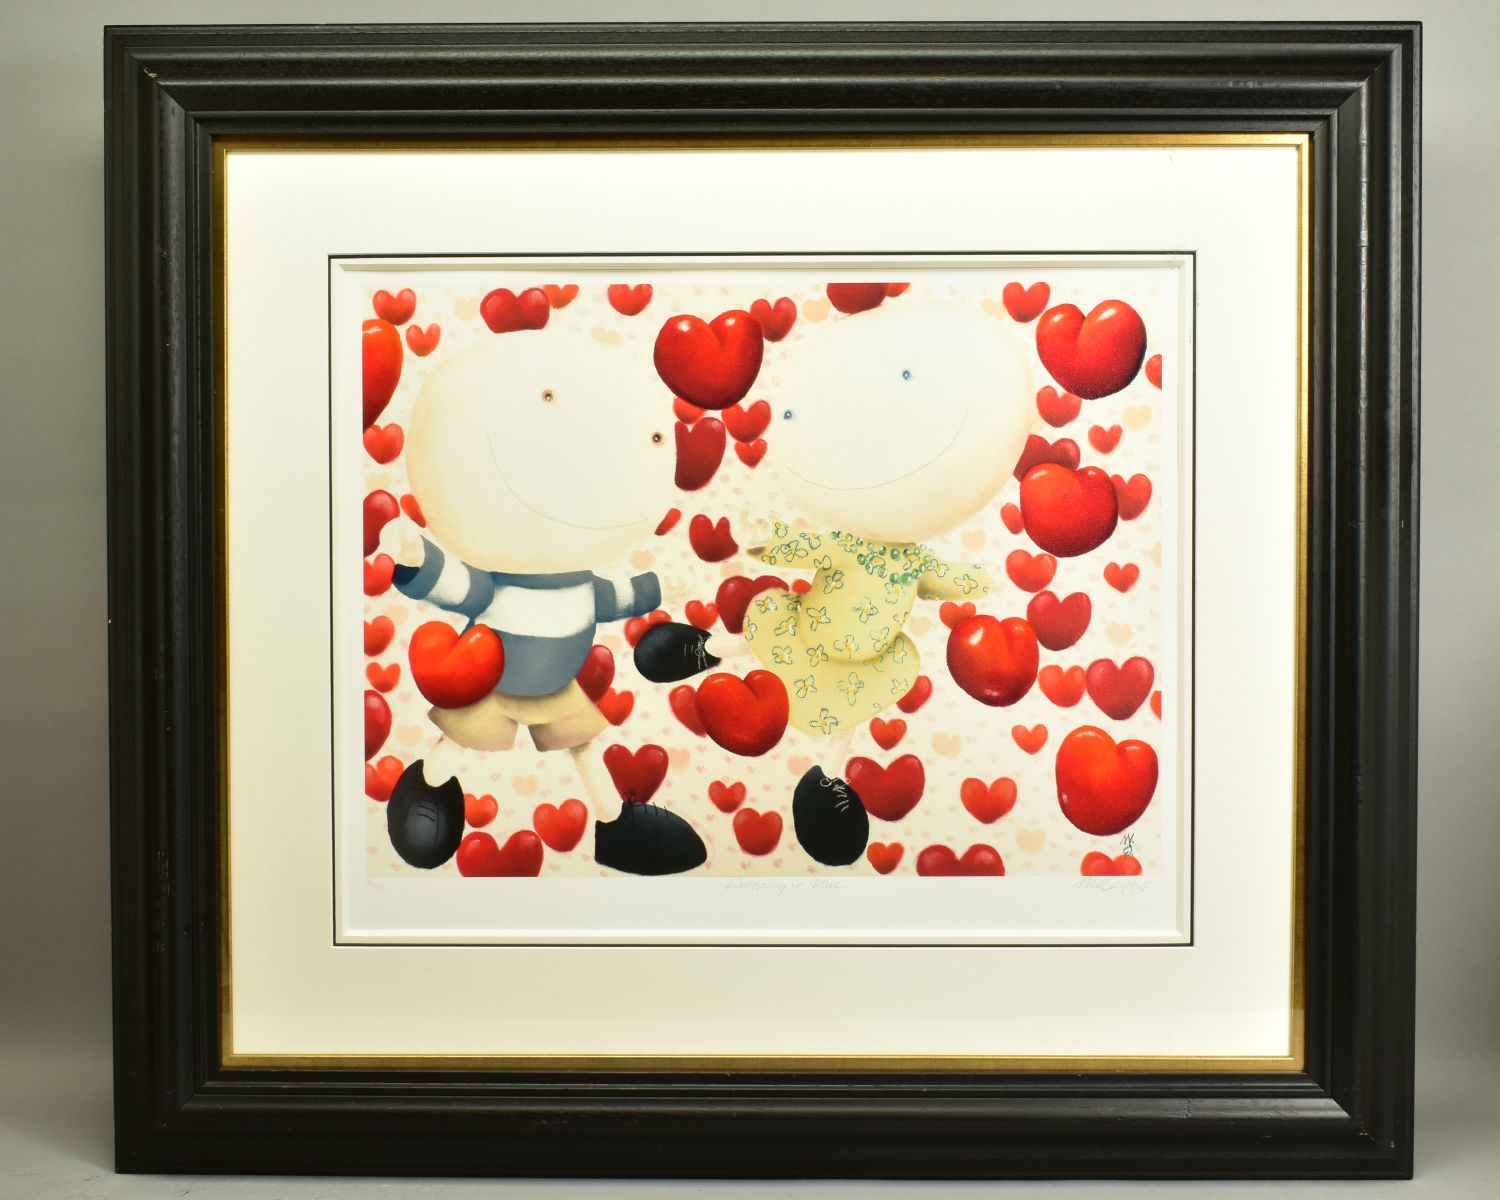 MACKENZIE THORPE (BRITISH 1956), 'Dancing In Love', a Limited Edition print of a couple surrounded